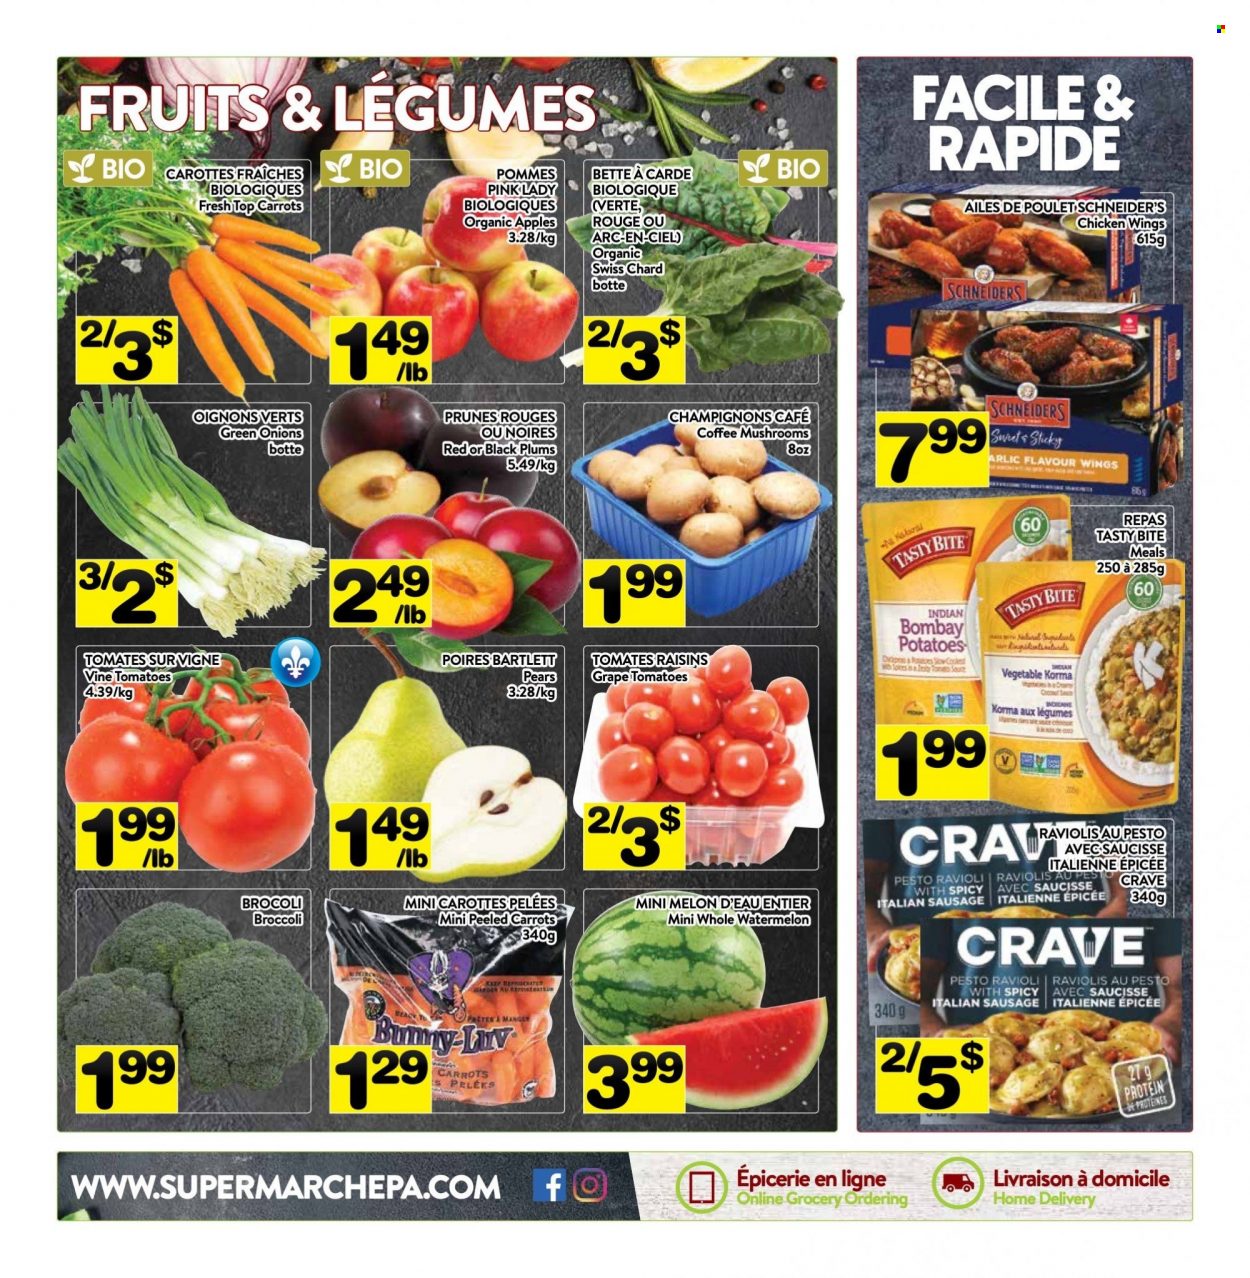 thumbnail - PA Supermarché Flyer - March 20, 2023 - March 26, 2023 - Sales products - potatoes, green onion, apples, Bartlett pears, watermelon, plums, pears, melons, black plums, Pink Lady, ravioli, sausage, italian sausage, chicken wings, prunes, dried fruit, coffee, chicken, raisins, pesto. Page 8.